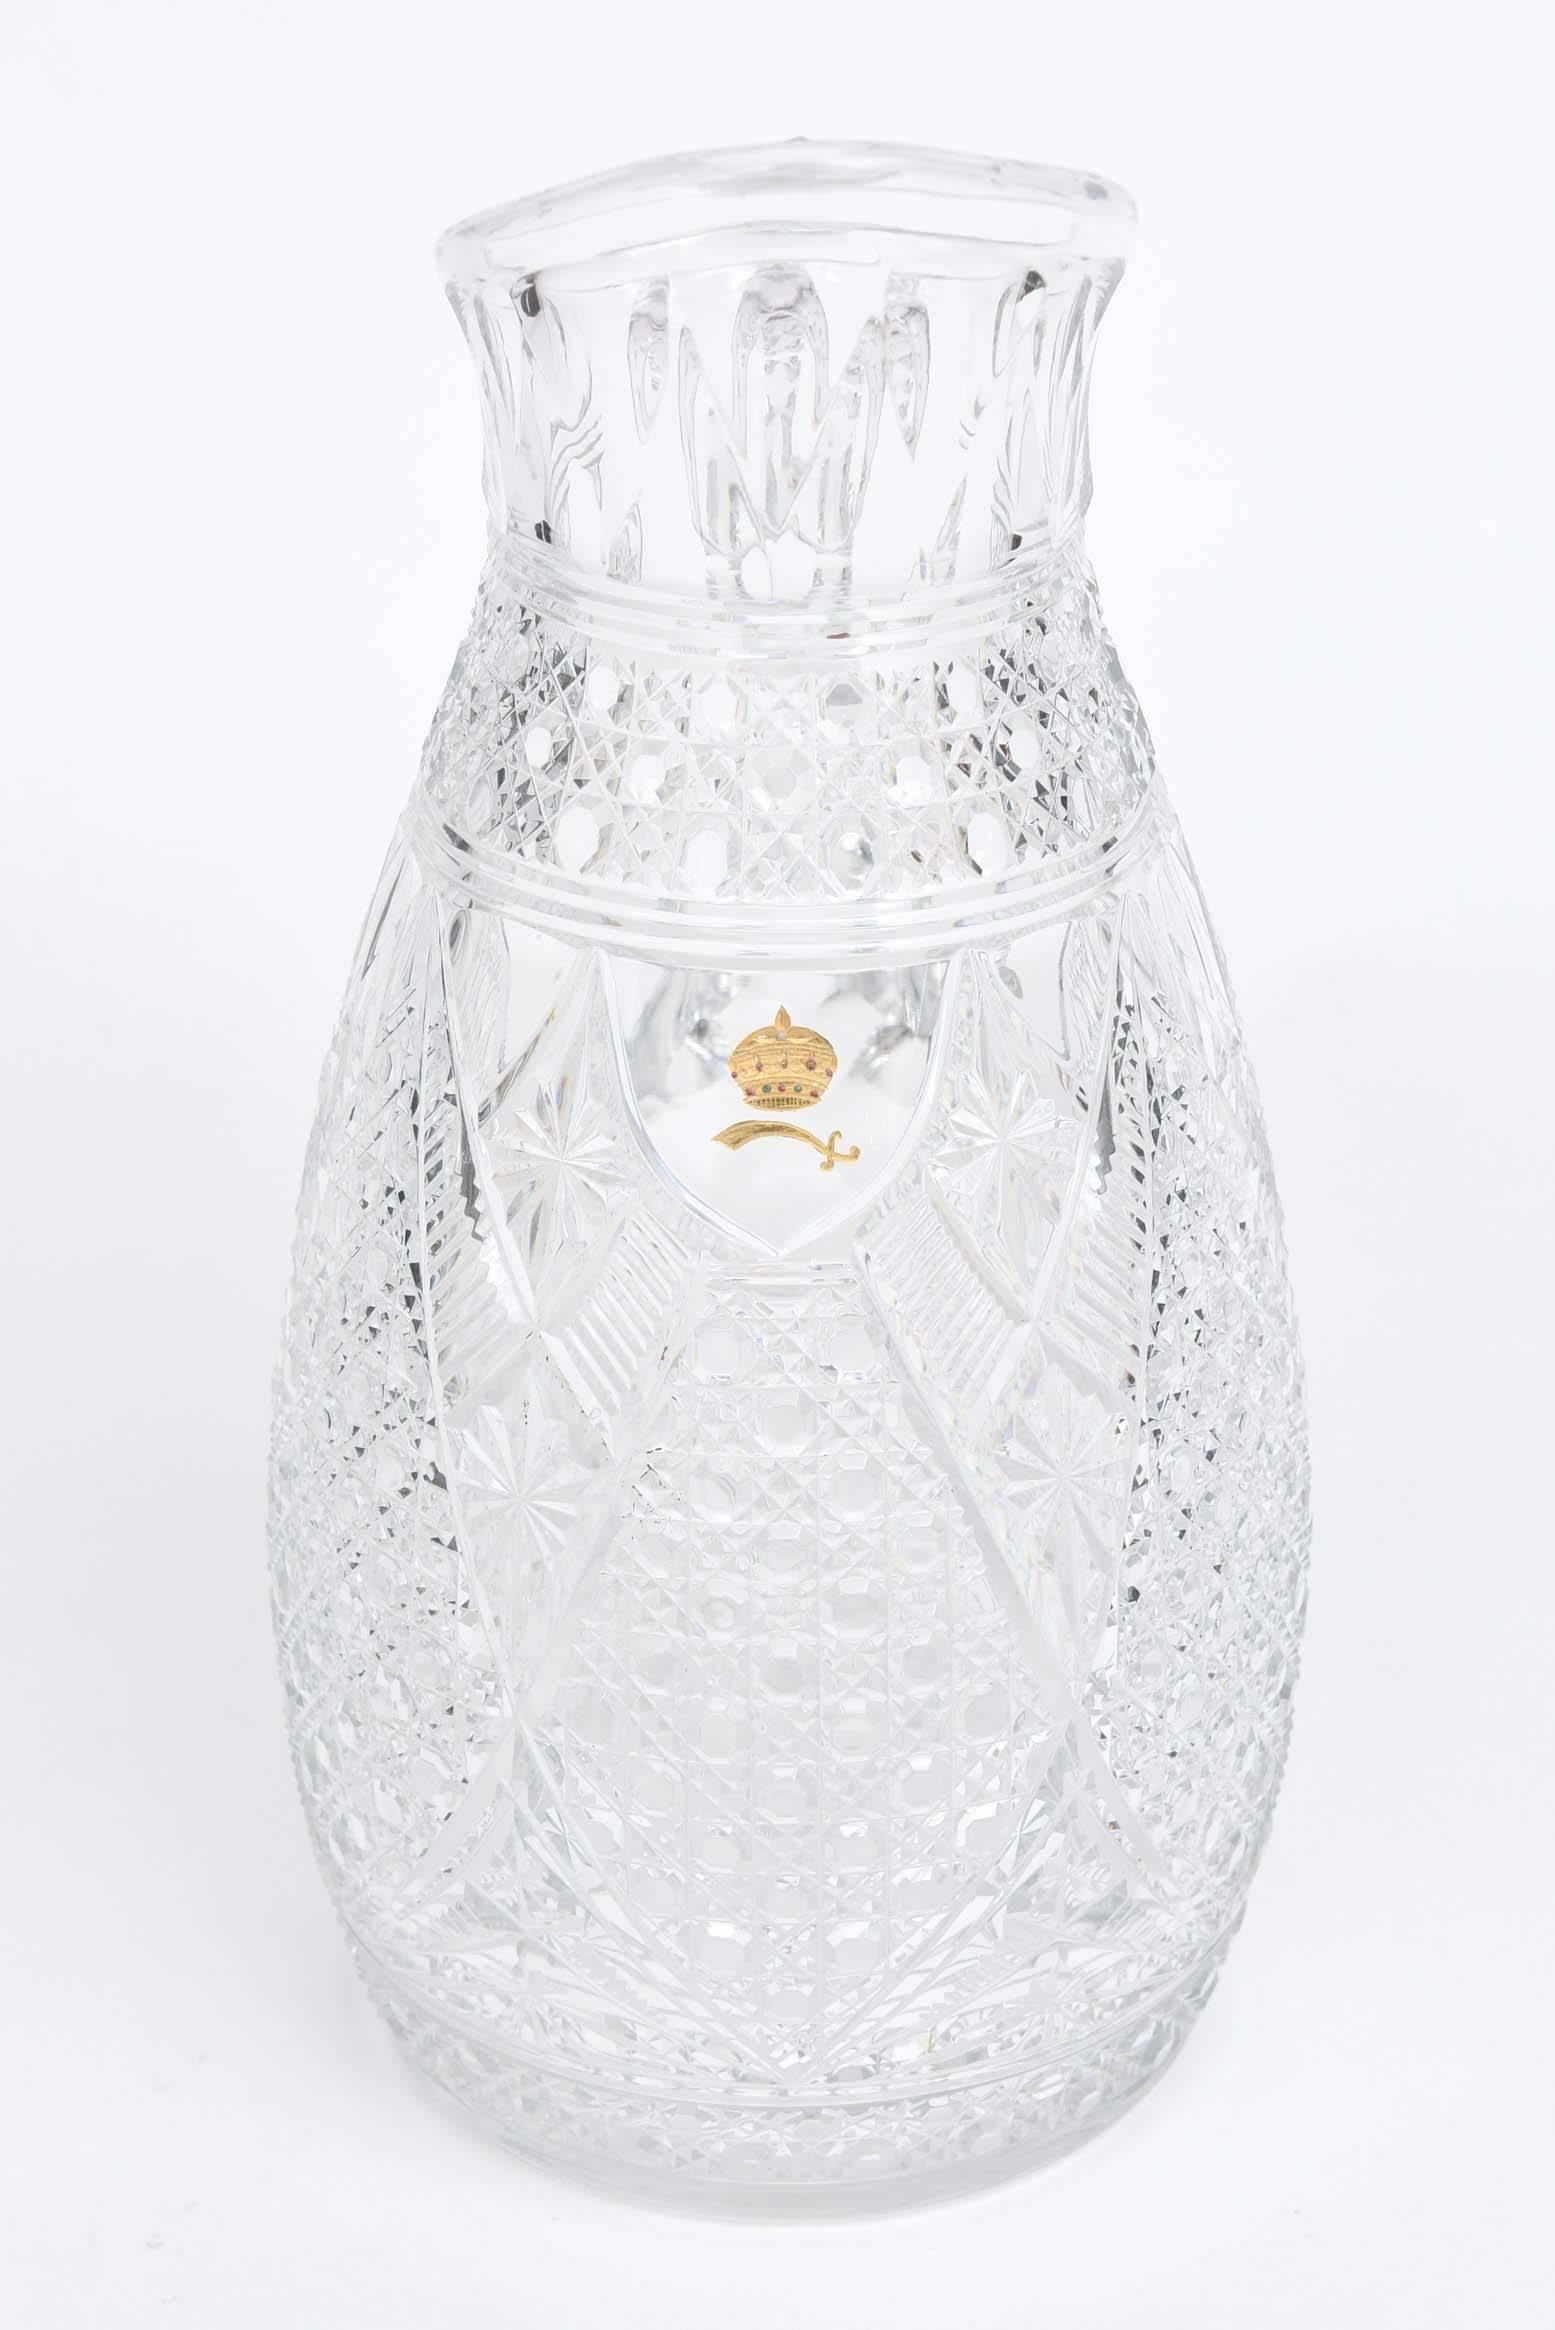 An unique and signed piece from the storied glass firm of Baccarat, France. Intricate pattern design and cuts distinguish this fine piece to highlight your bar. Custom-made and featuring the crest for the sultan of Brunei. Museum quality and in